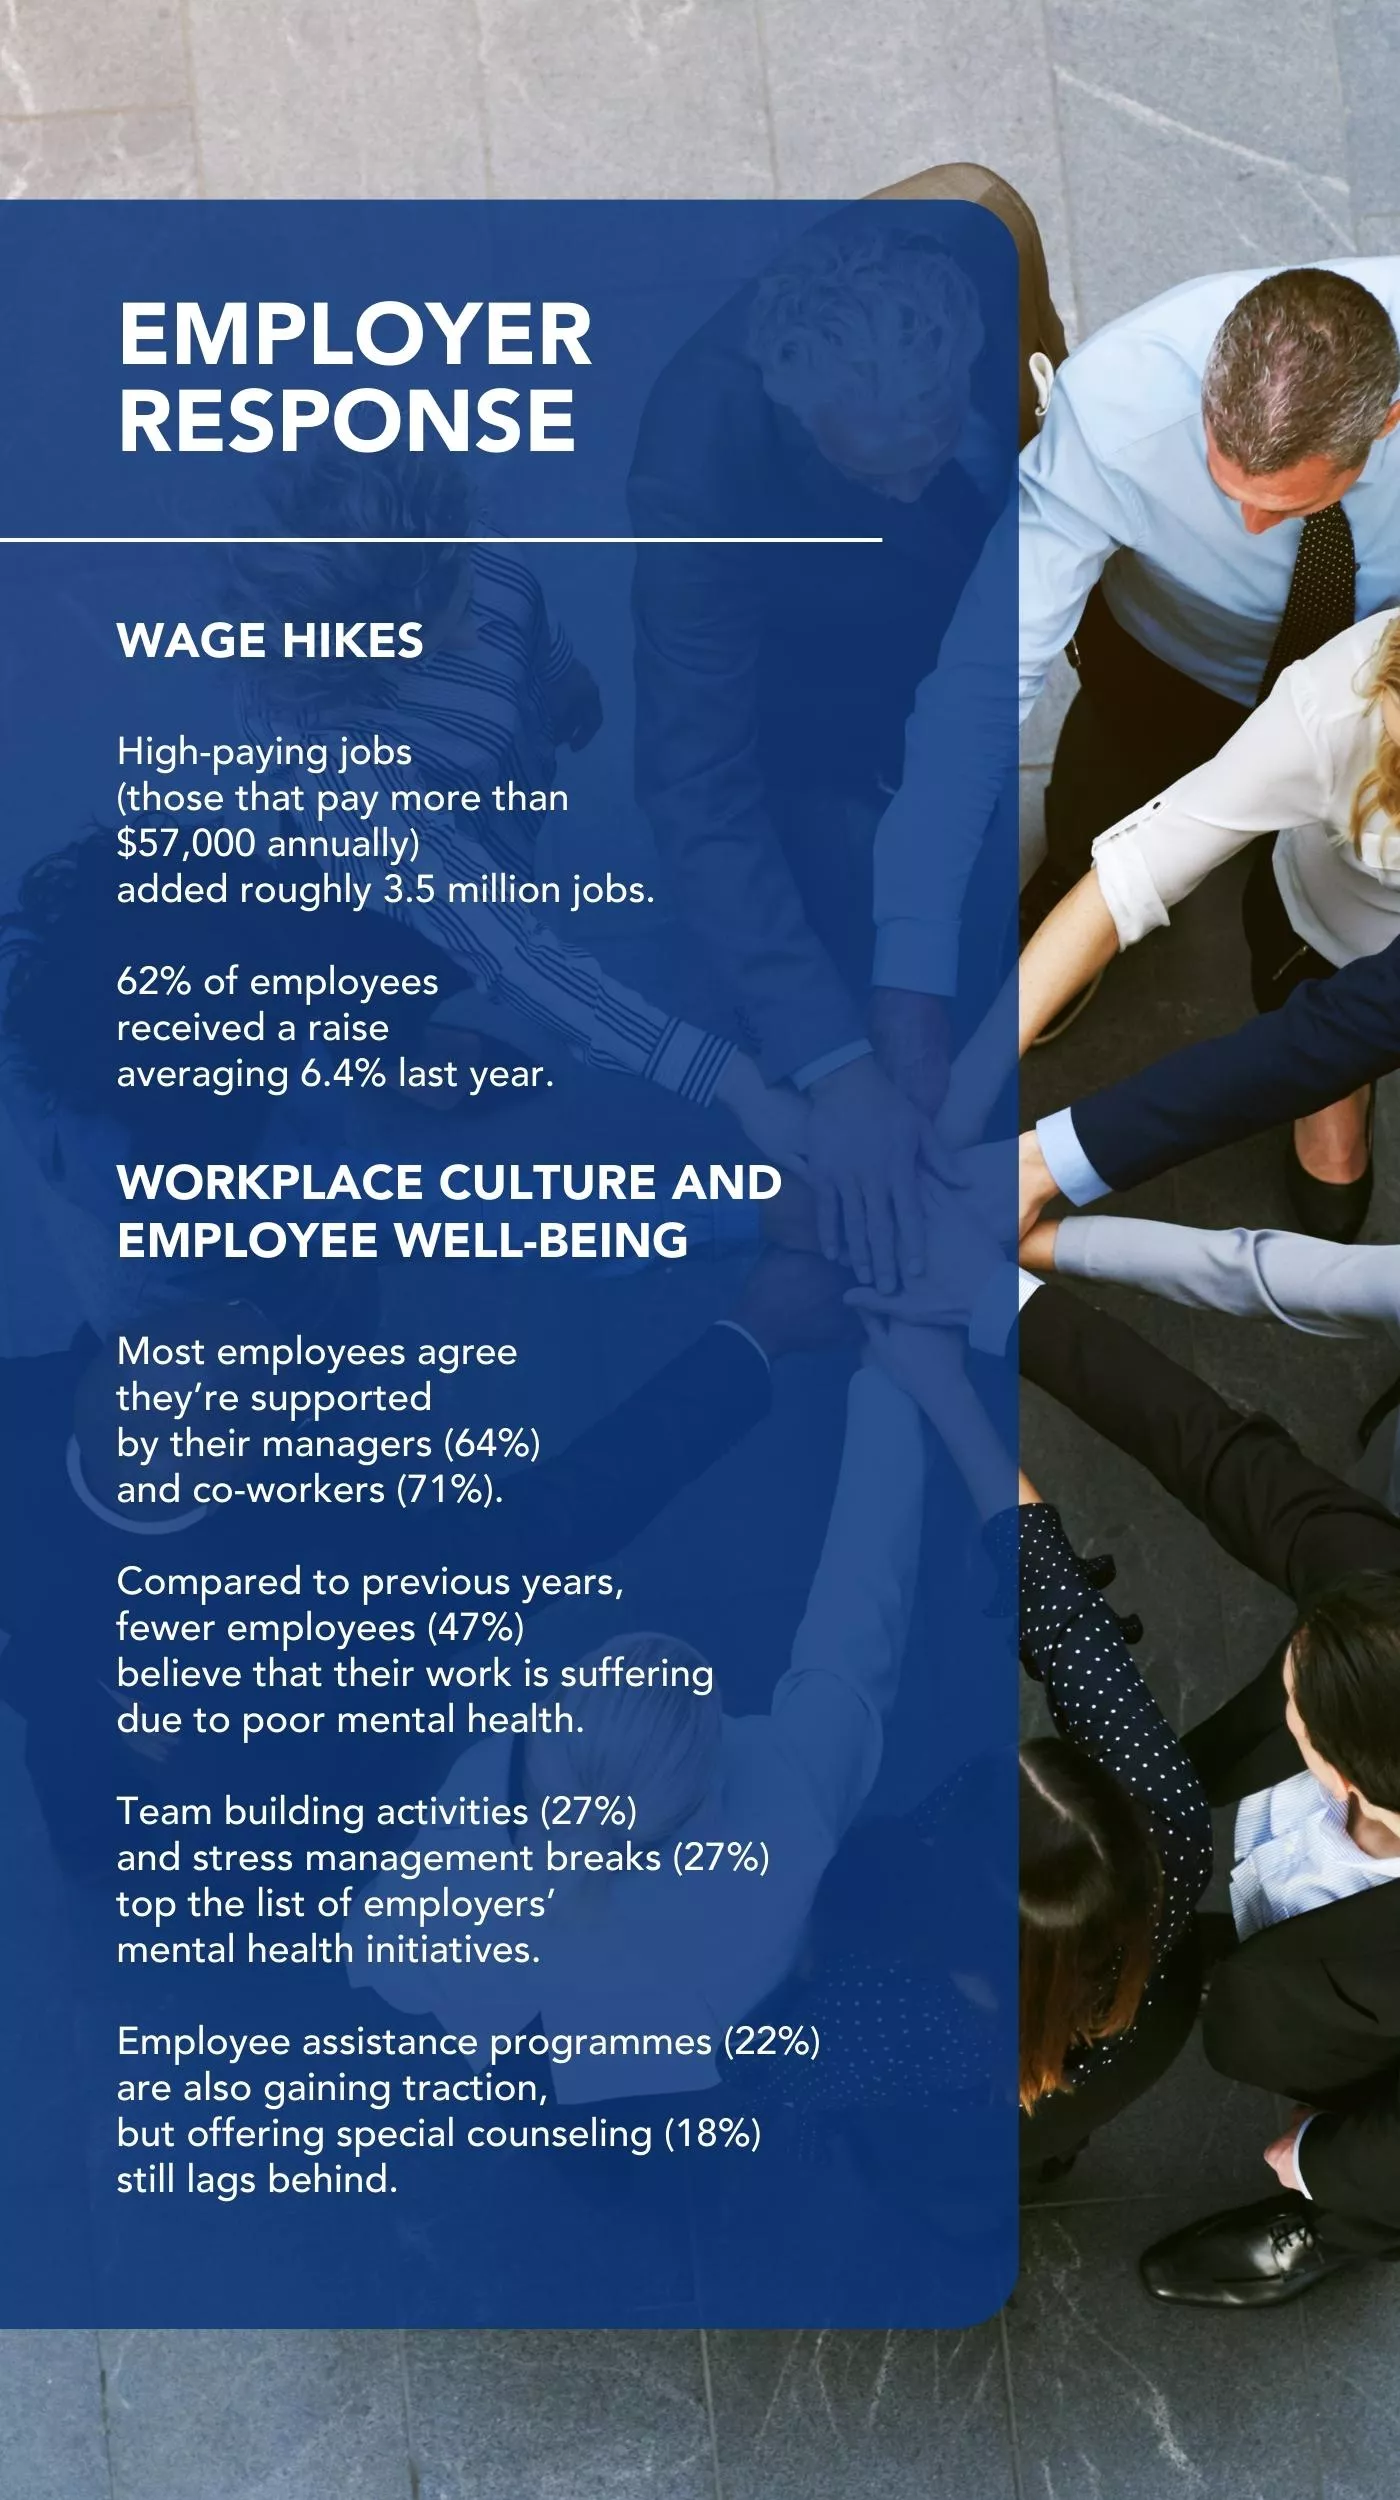 An infographic shows how employers respond to HR outsourcing trends.